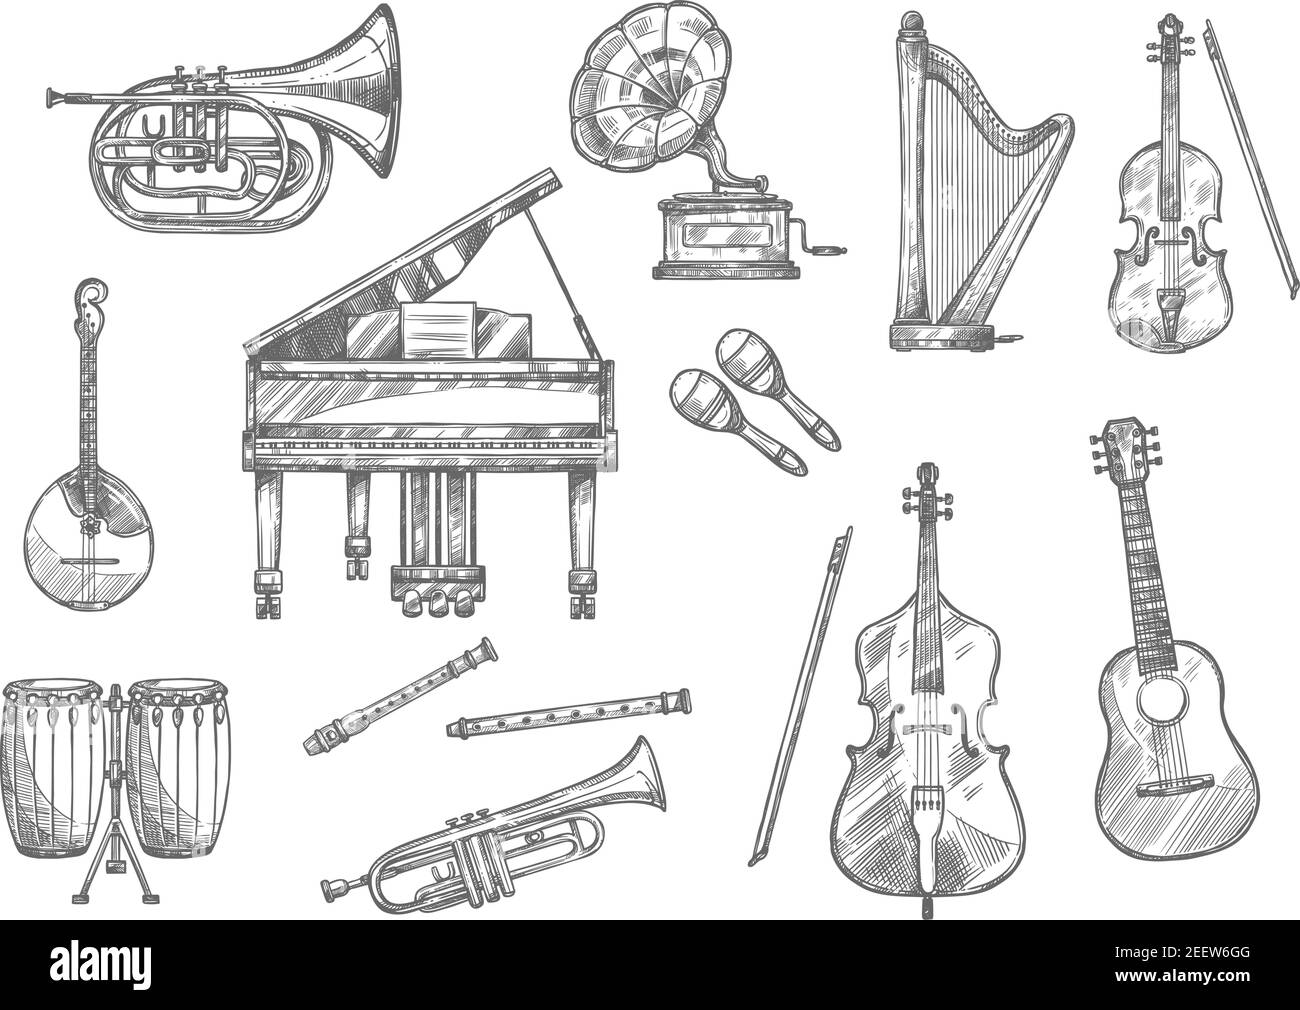 Musical instruments Drawing by Pryesh Chaitram - Pixels-vachngandaiphat.com.vn